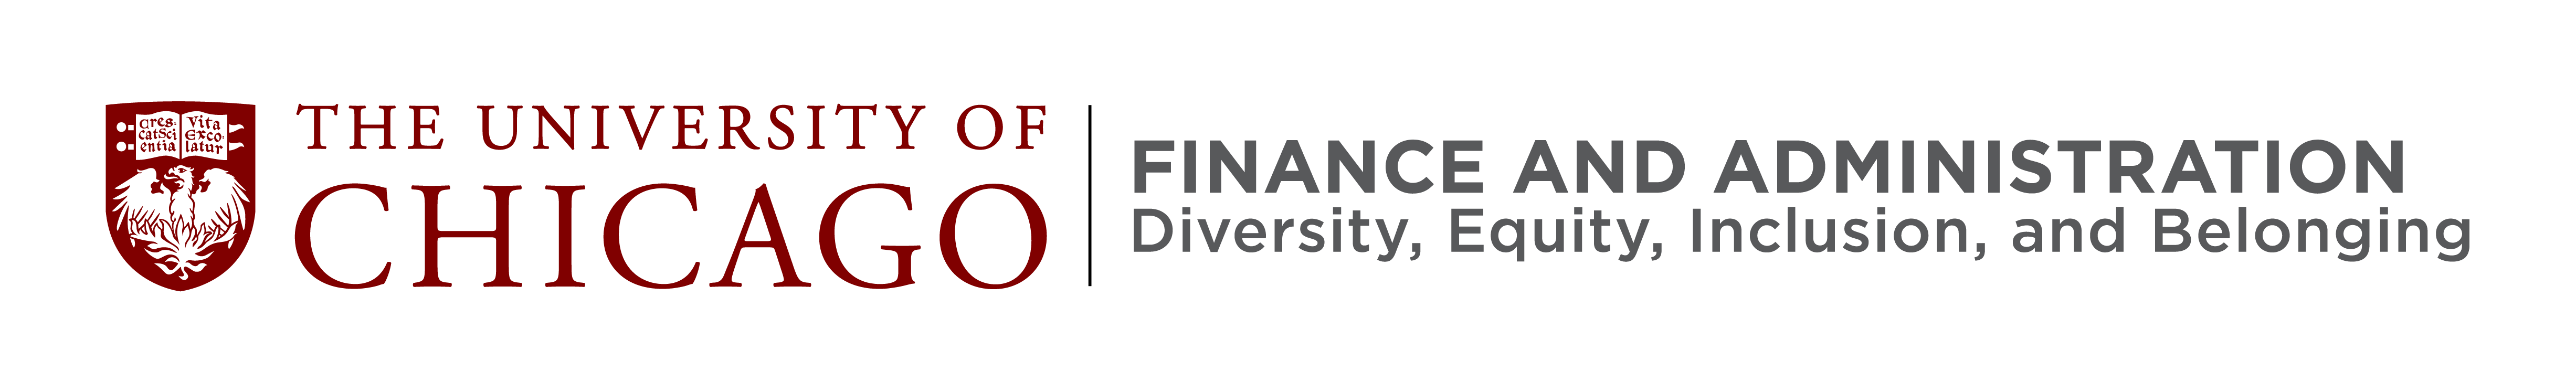 Uchicago Finance and Administration - Diversity, Equity, Inclusion, and Belonging